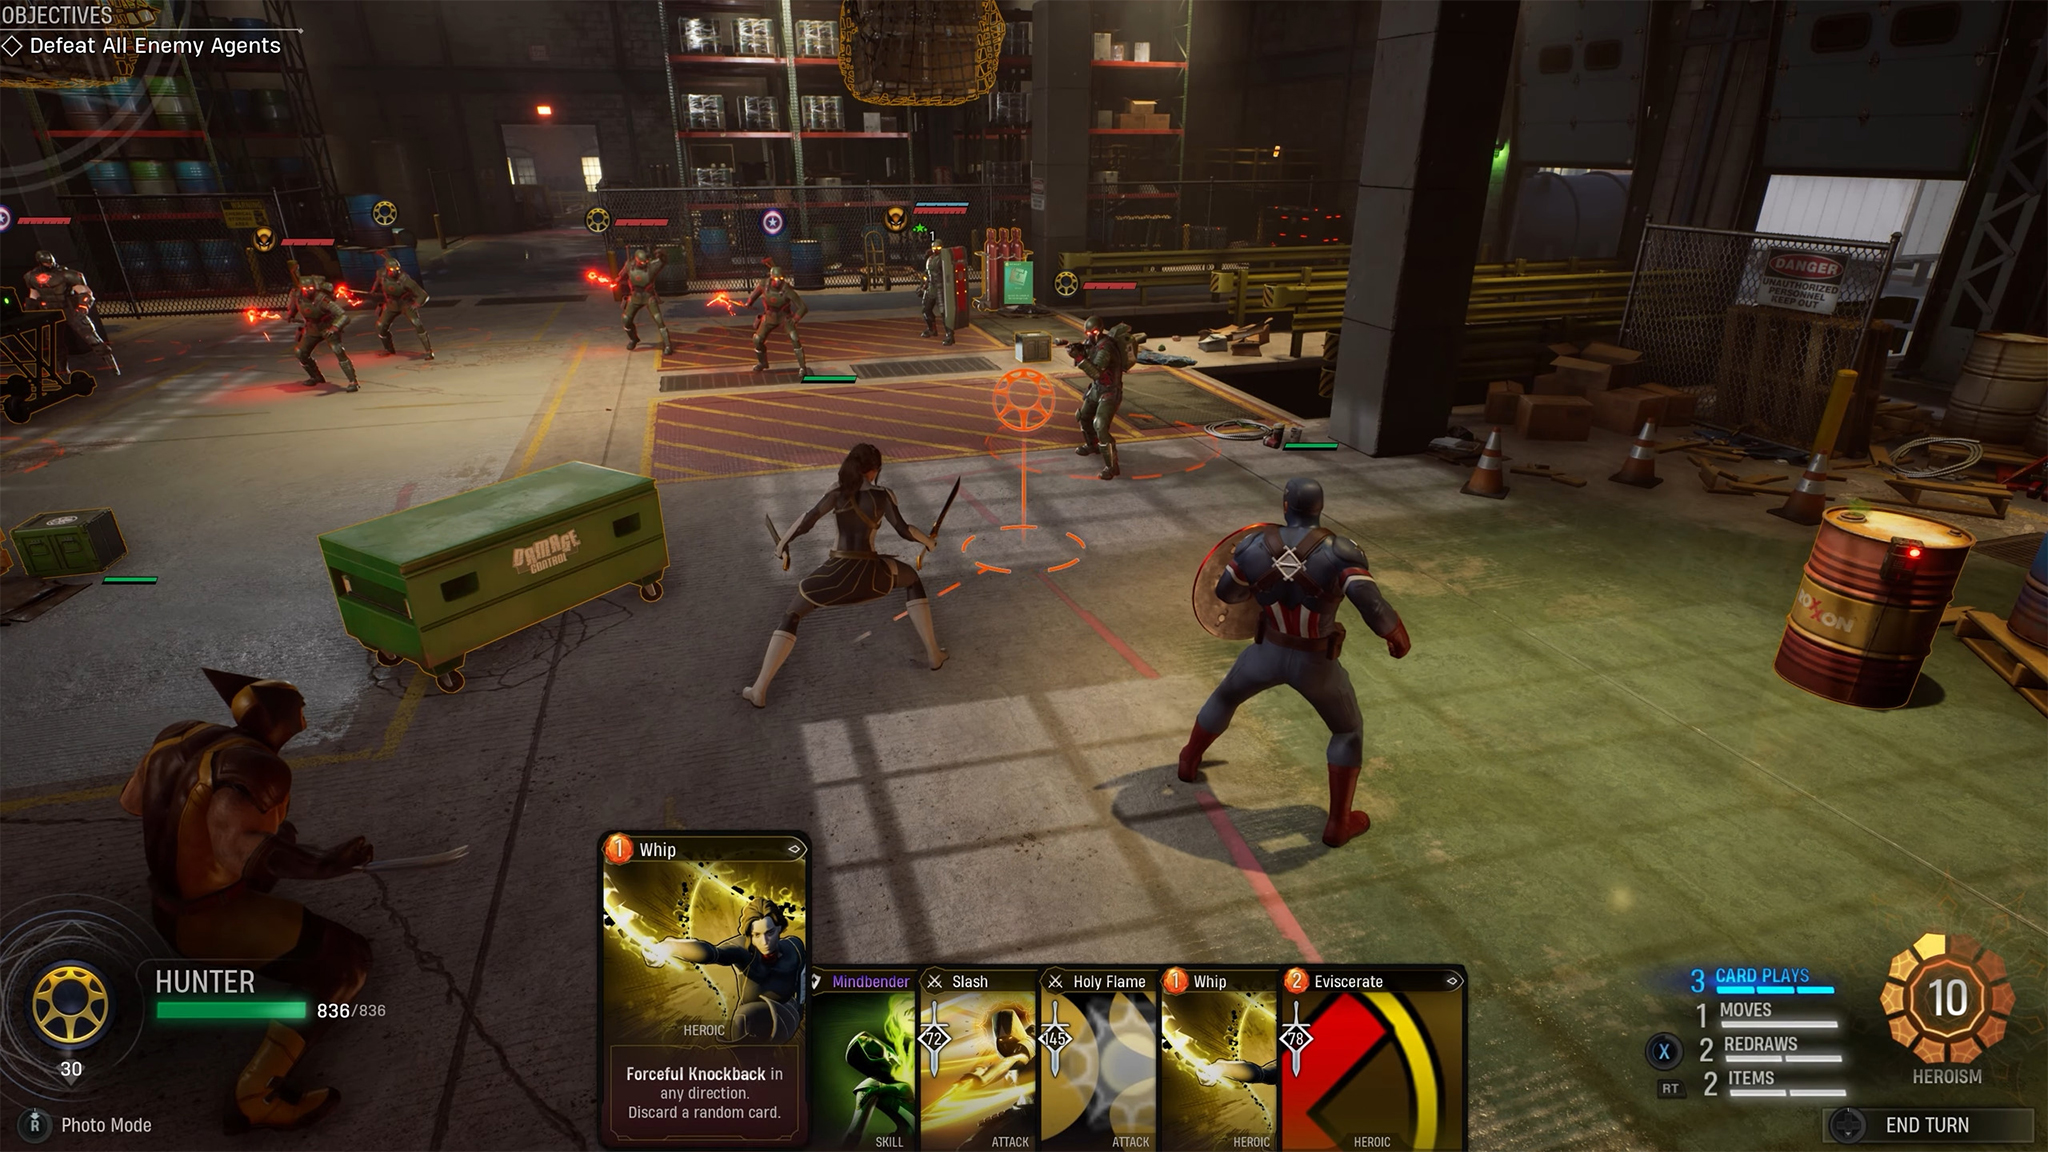 Here's Marvel's Midnight Suns gameplay in action